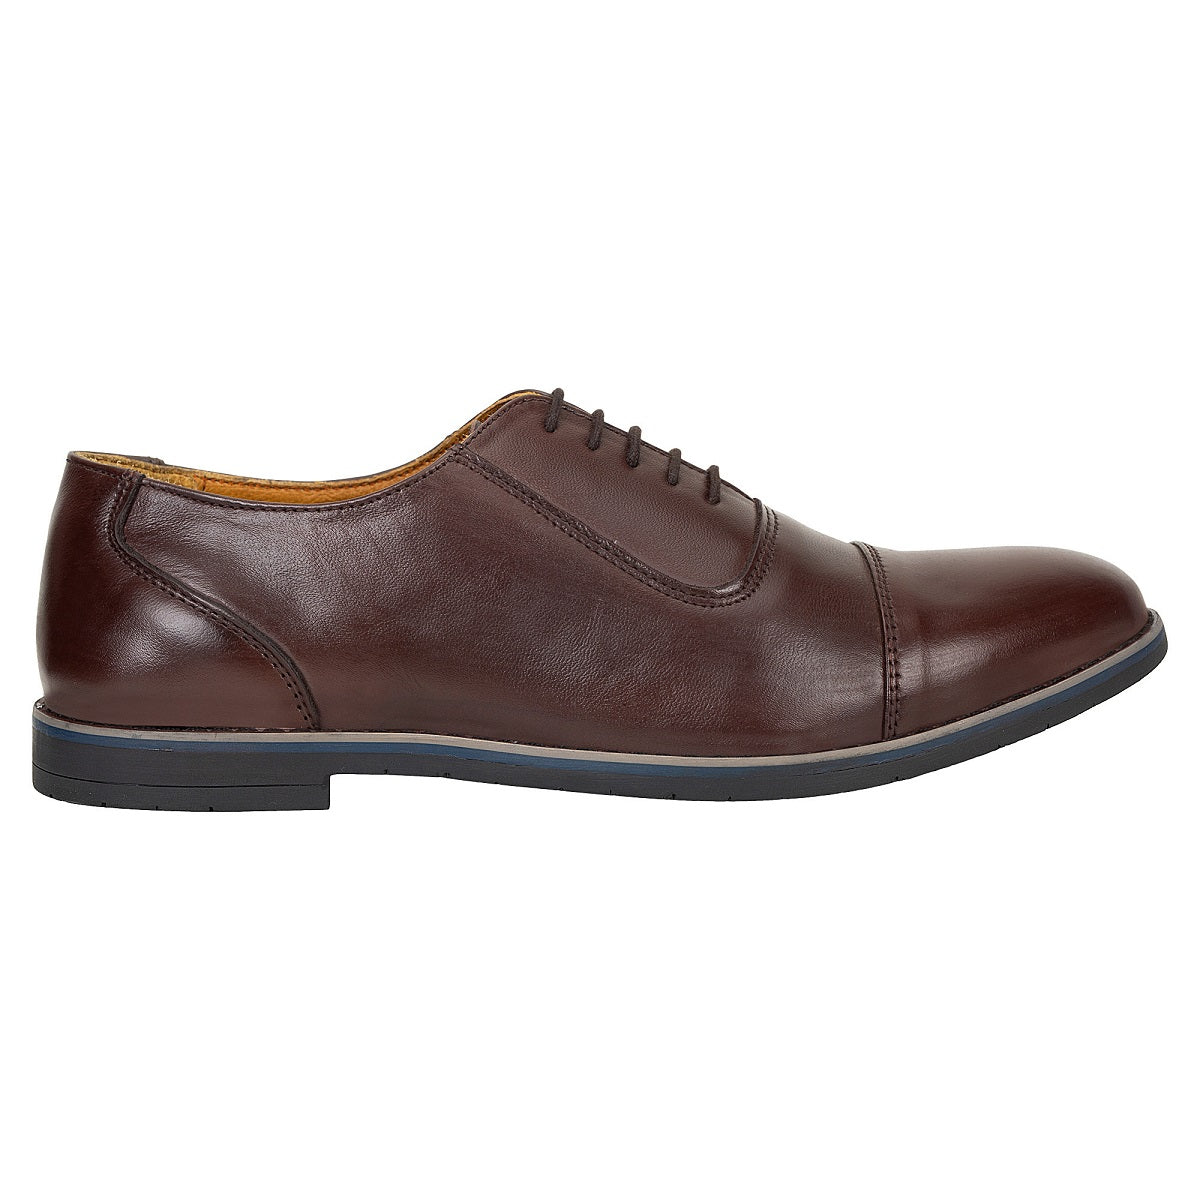 Classic Oxford Leather Formal Shoes